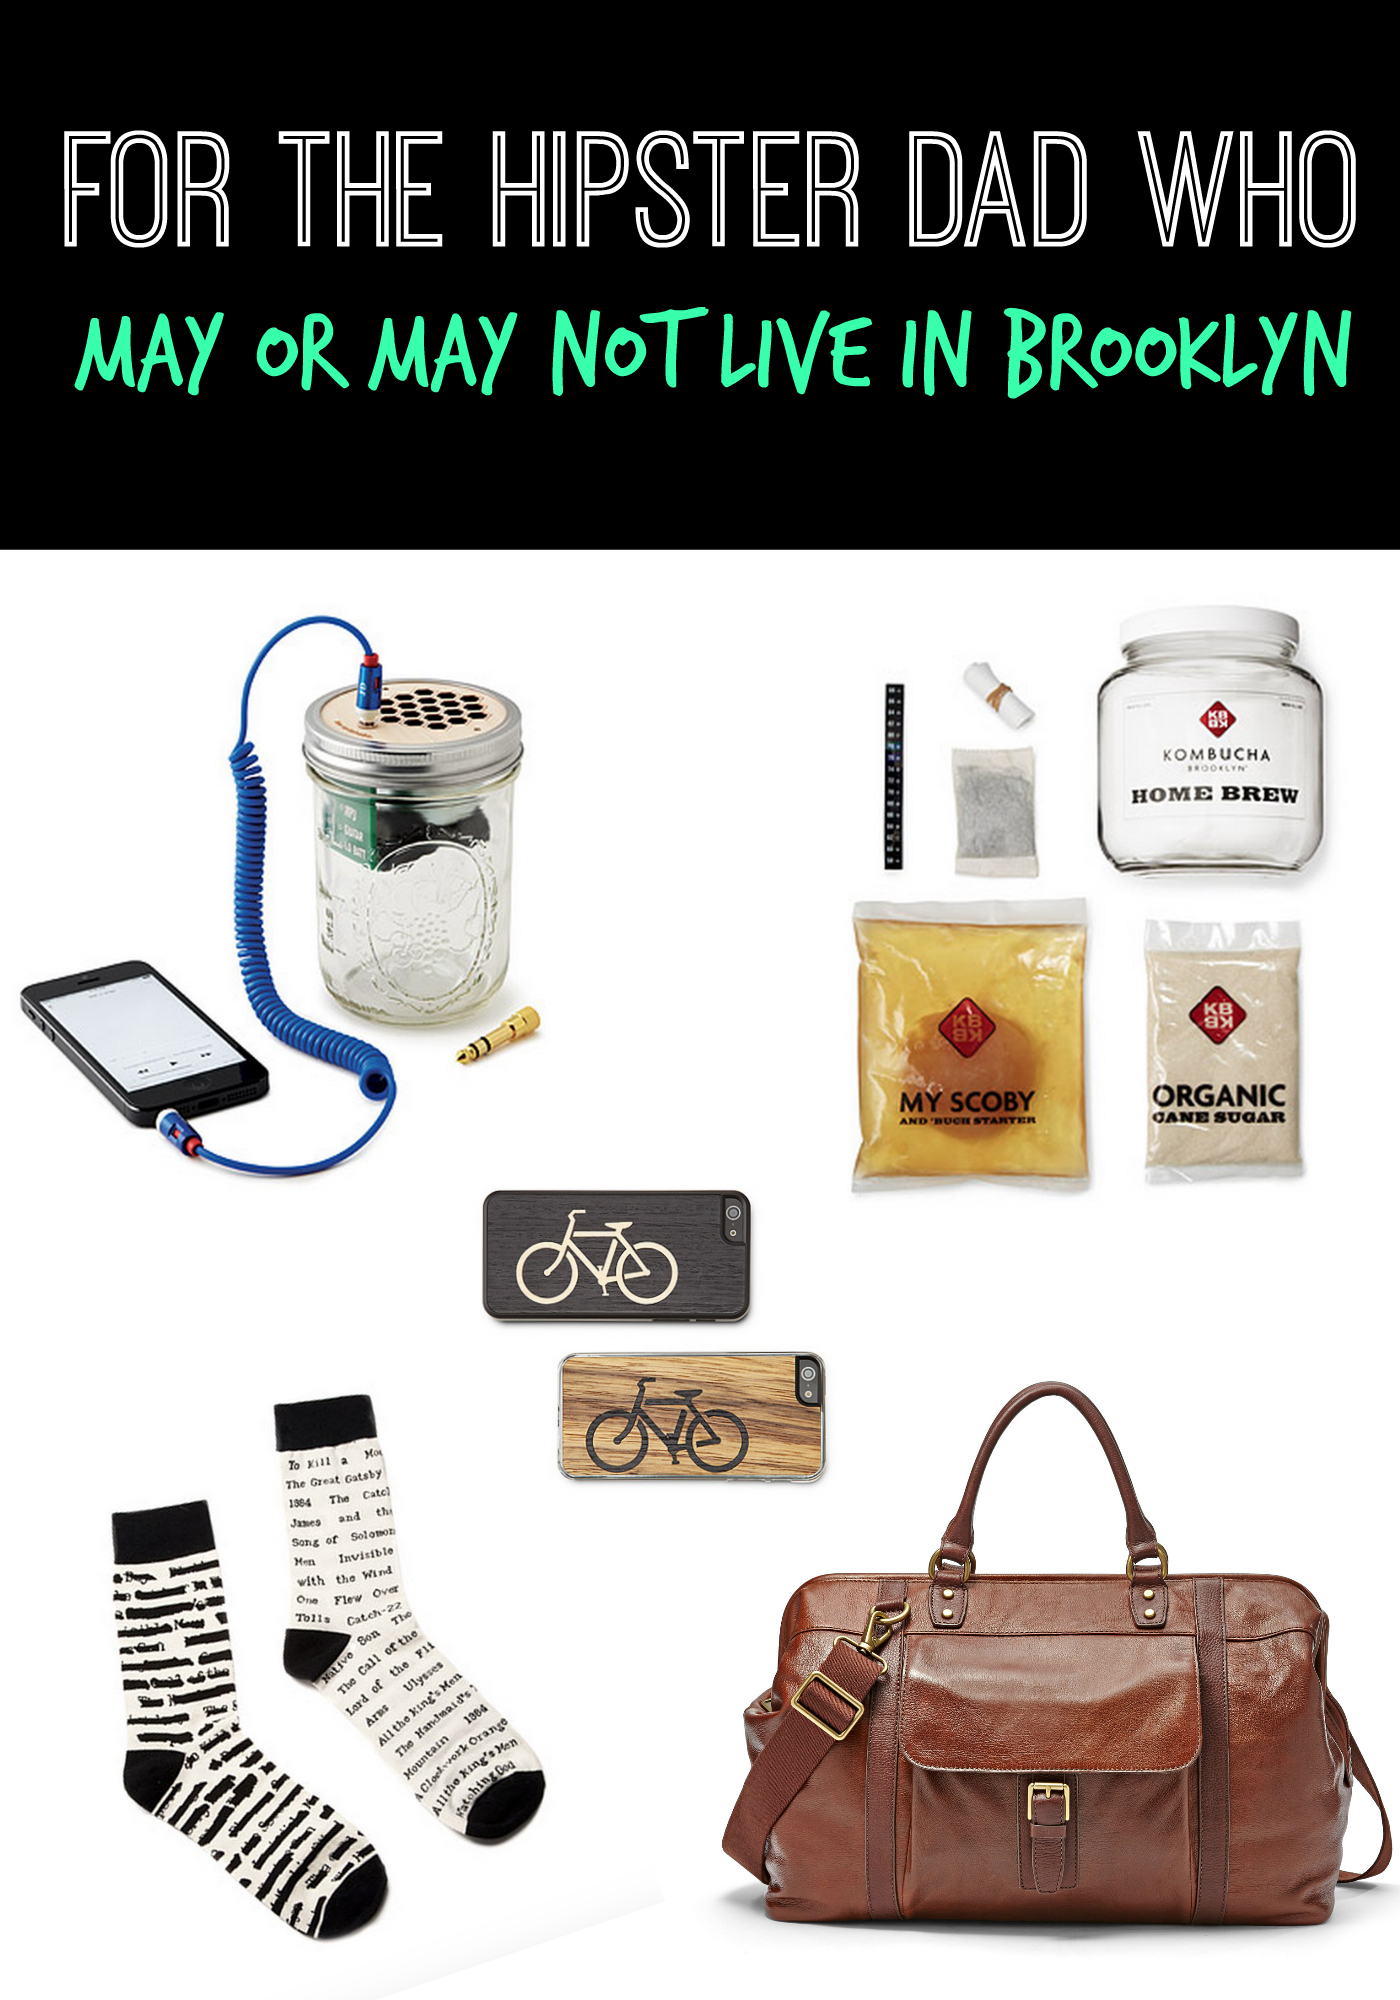 For the Hipster Dad Who May or May not Live in Brooklyn